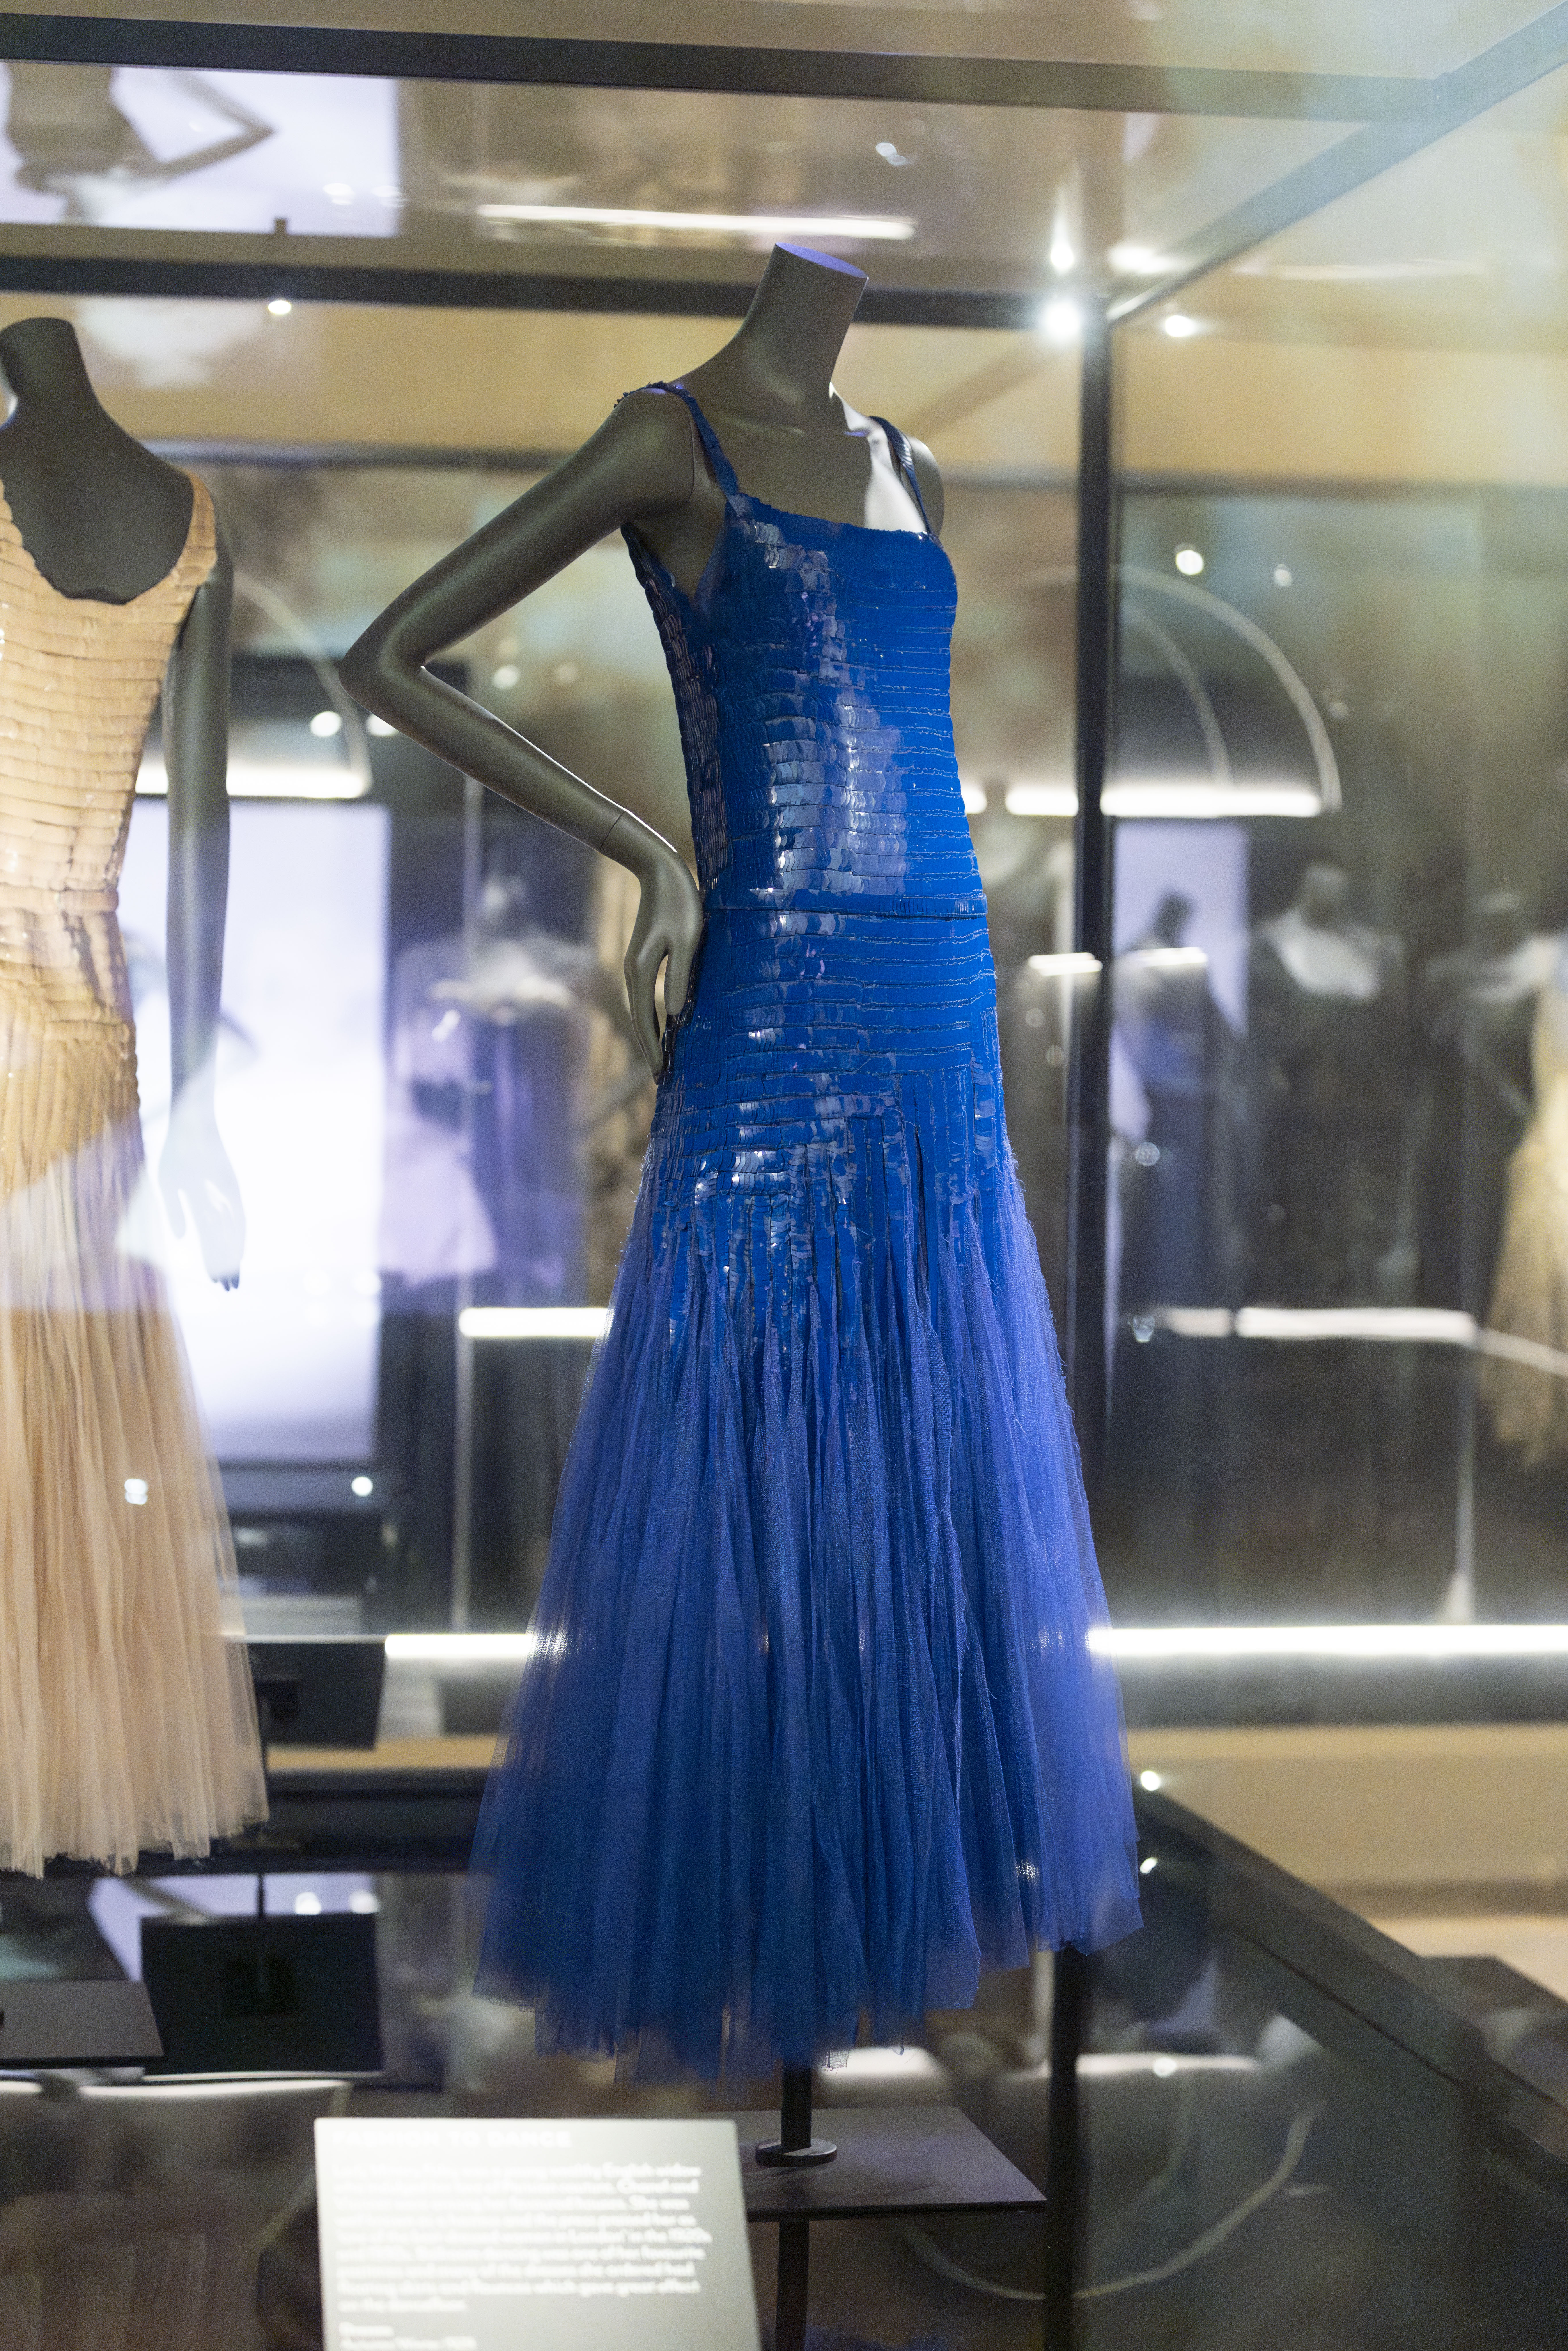 Inside the New Chanel Exhibition at the V&A in London